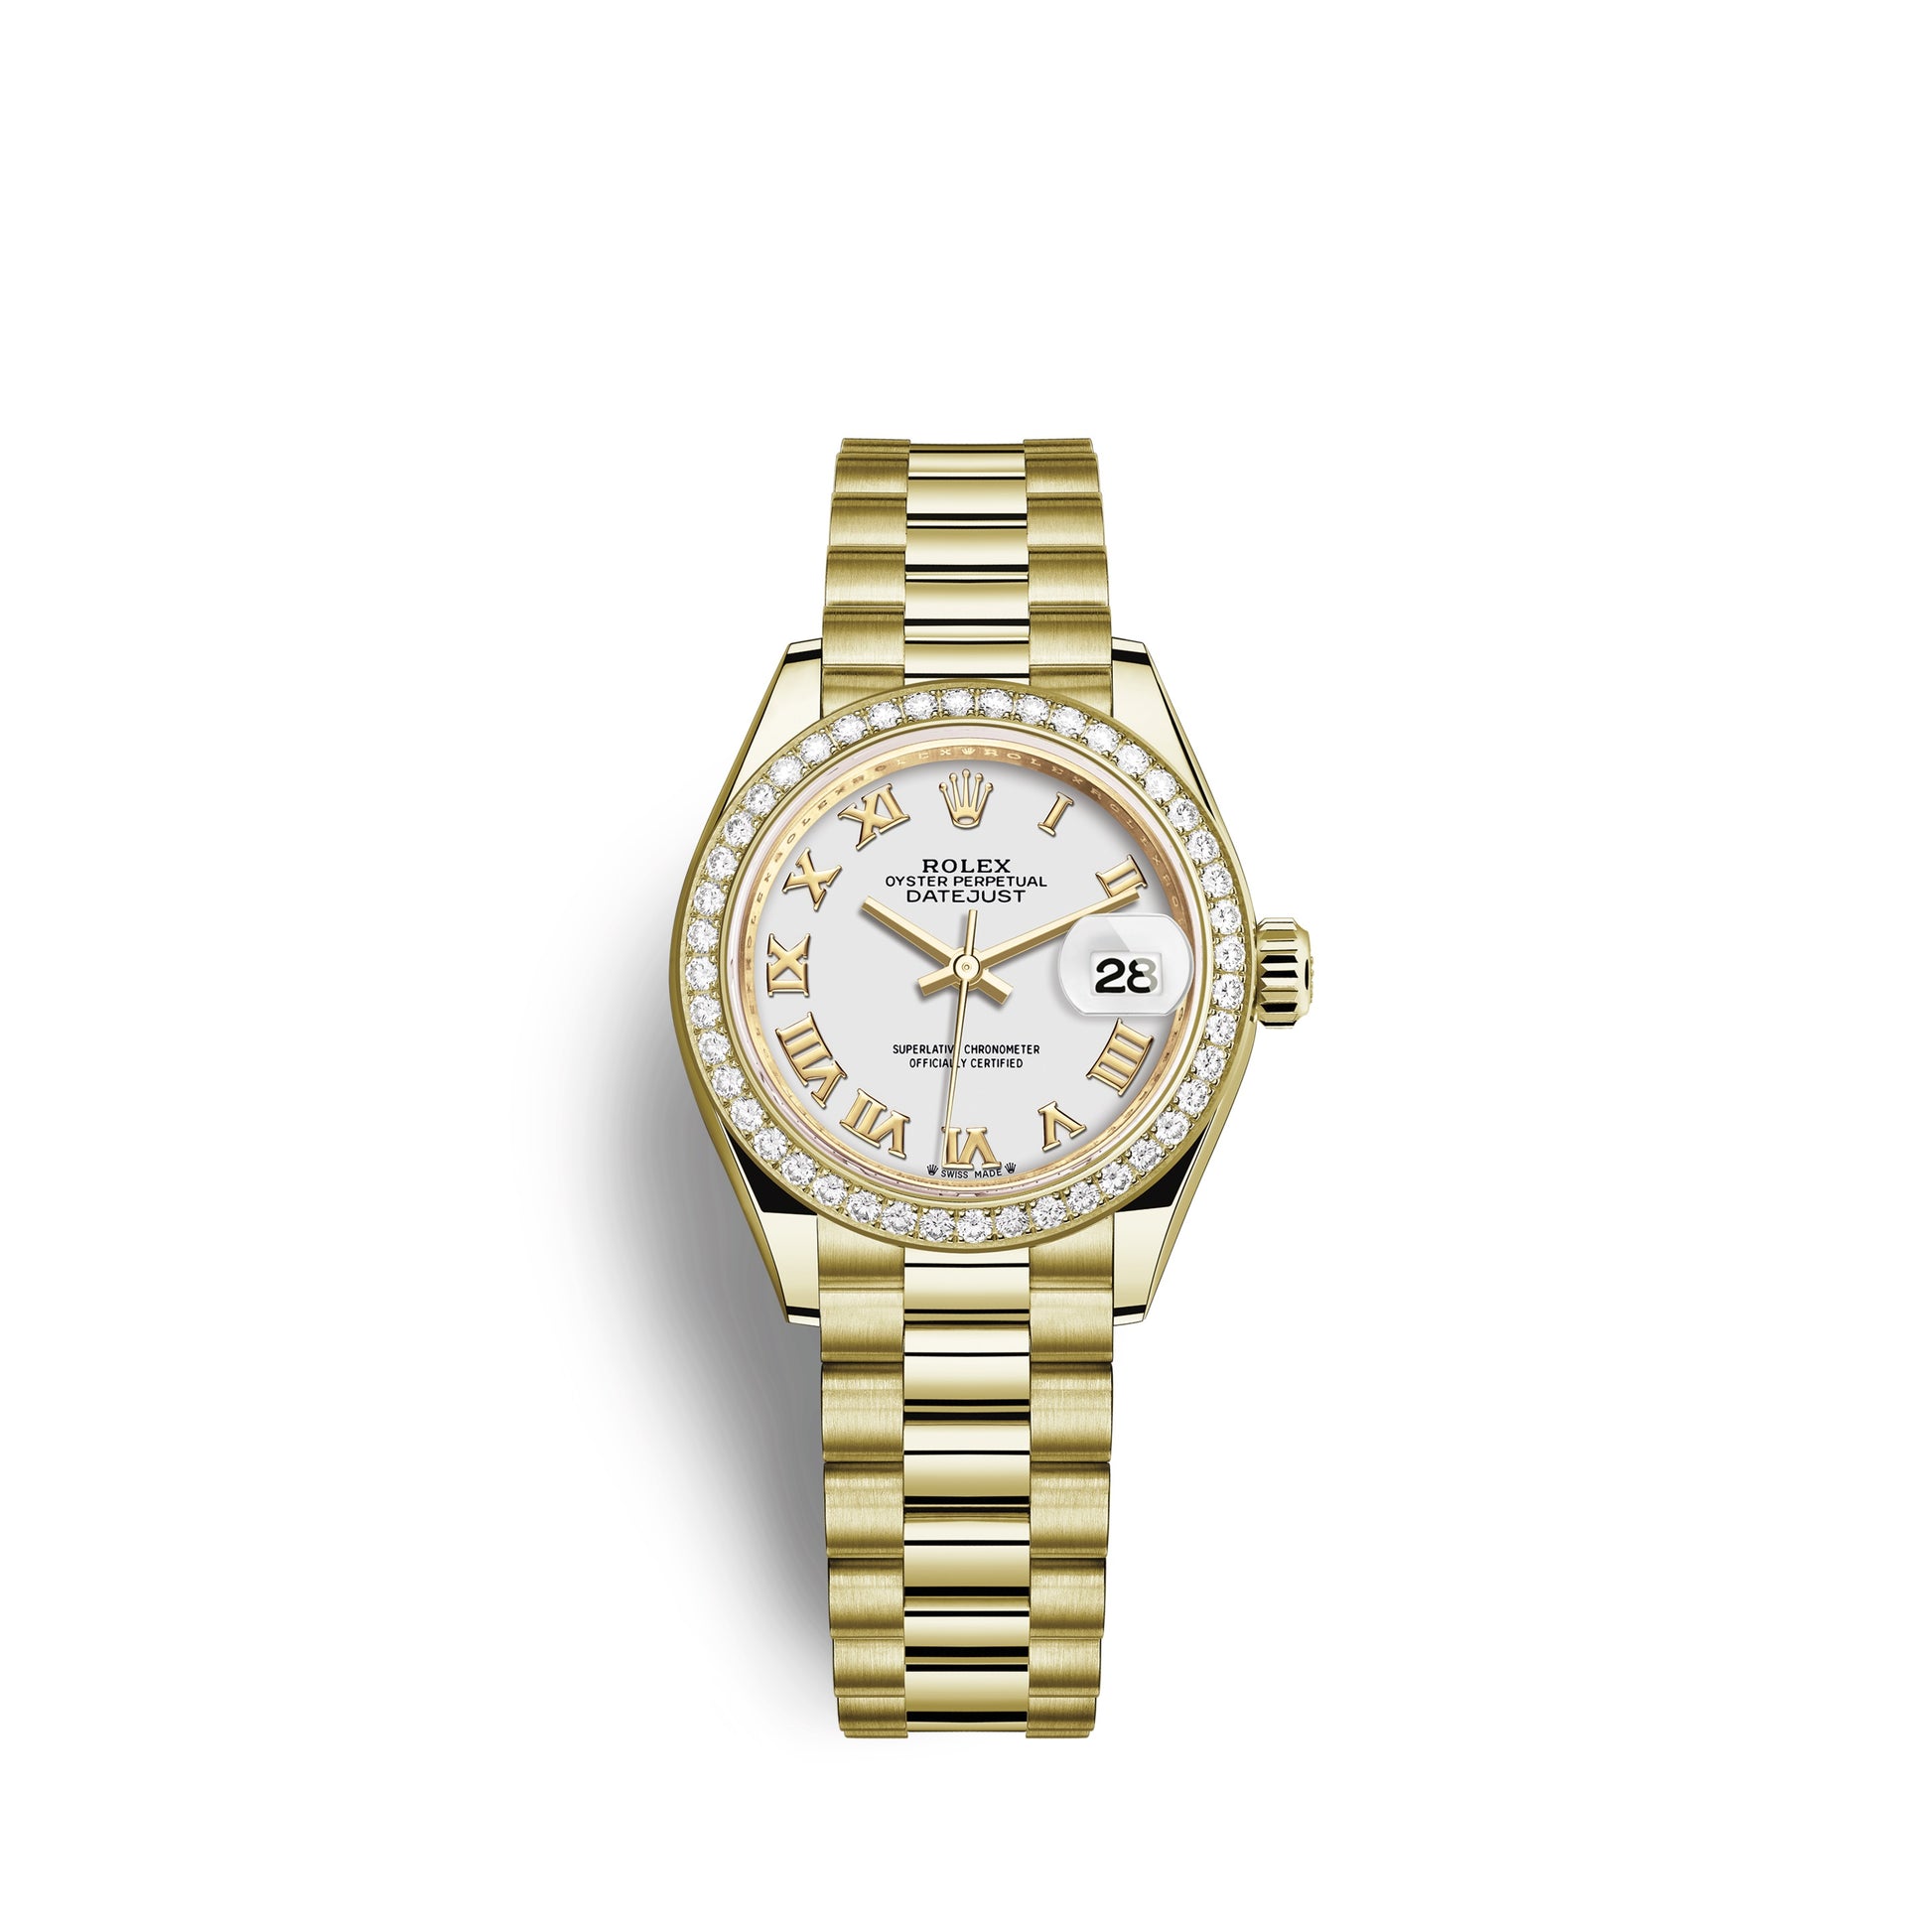 Rolex Lady-Datejust 28, 18kt Yellow Gold and diamonds, Ref# 279138RBR-0031